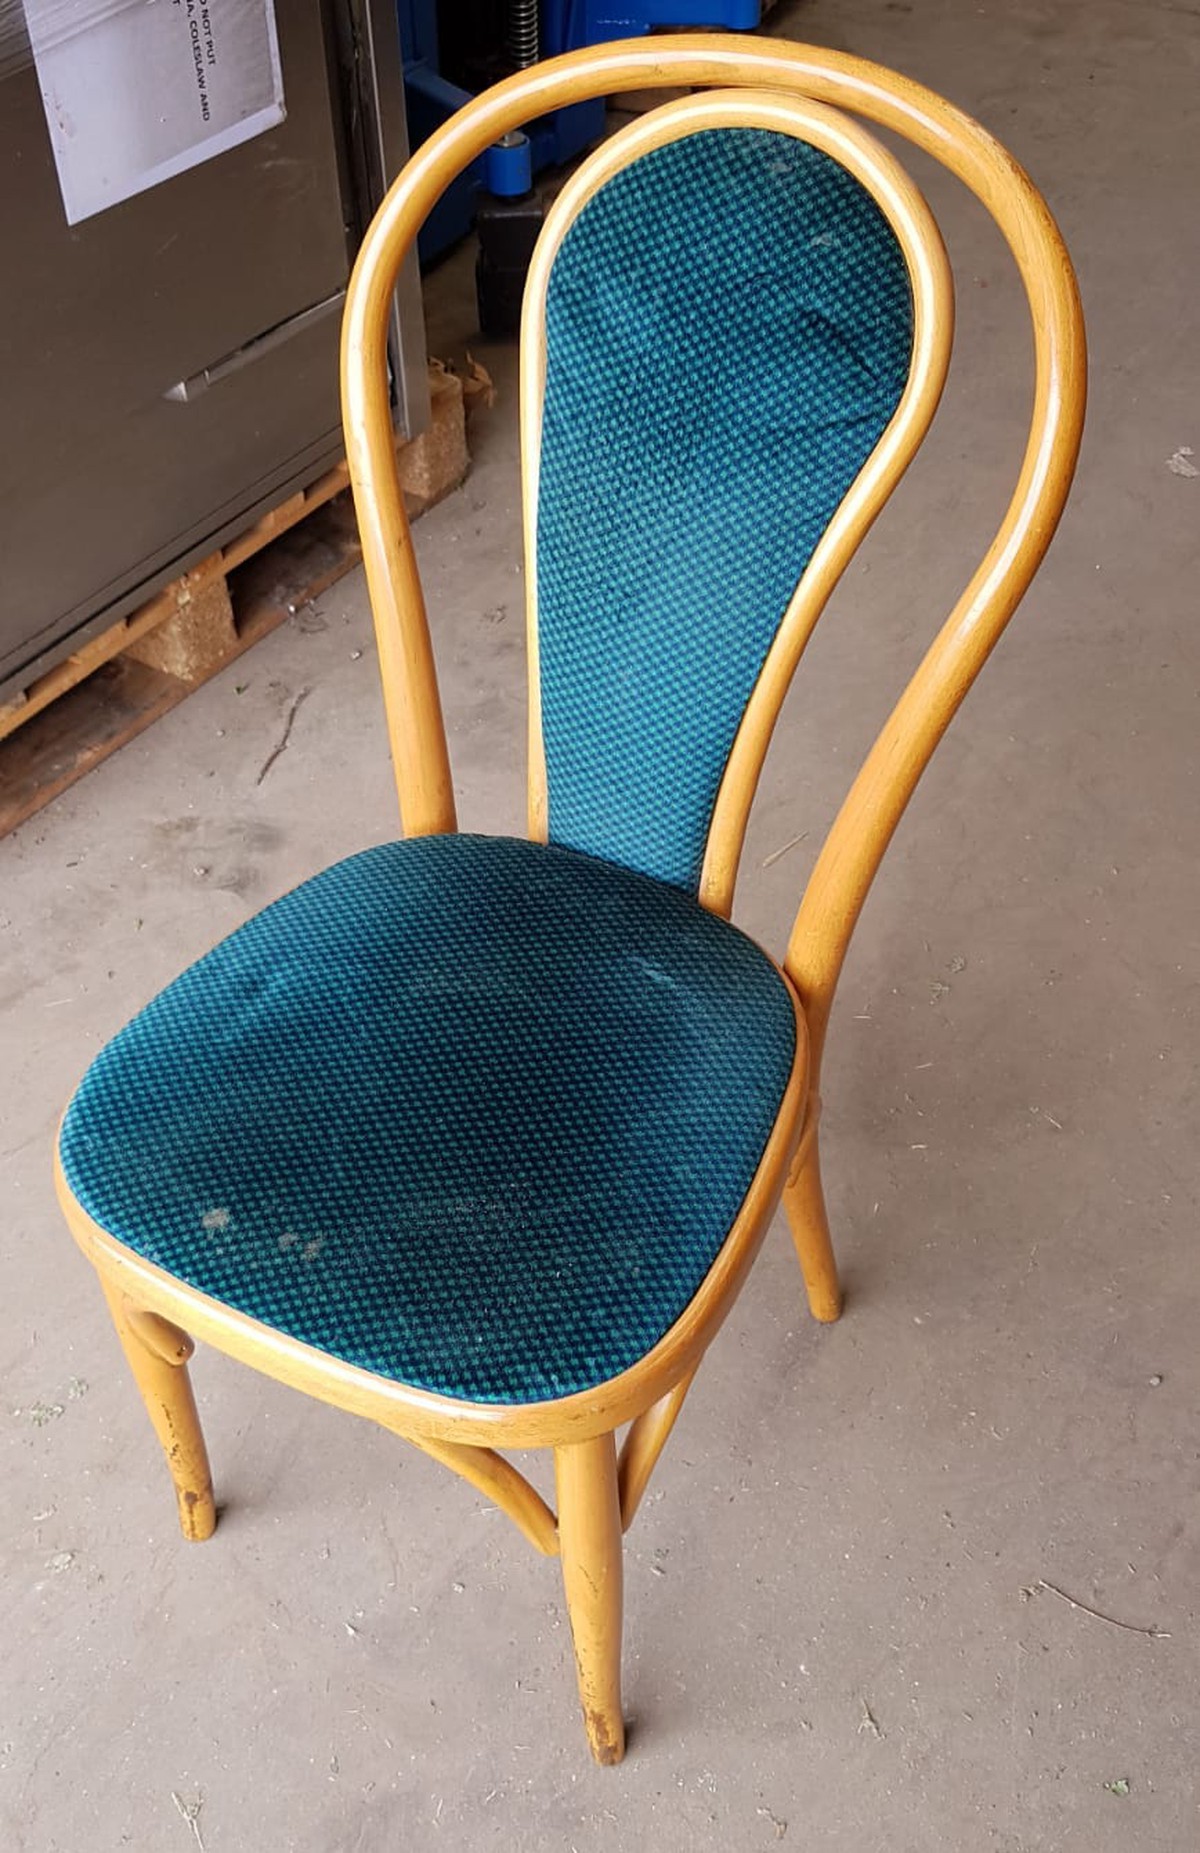 Secondhand Chairs And Tables Cafe Or Bistro Chairs 25x Cafe